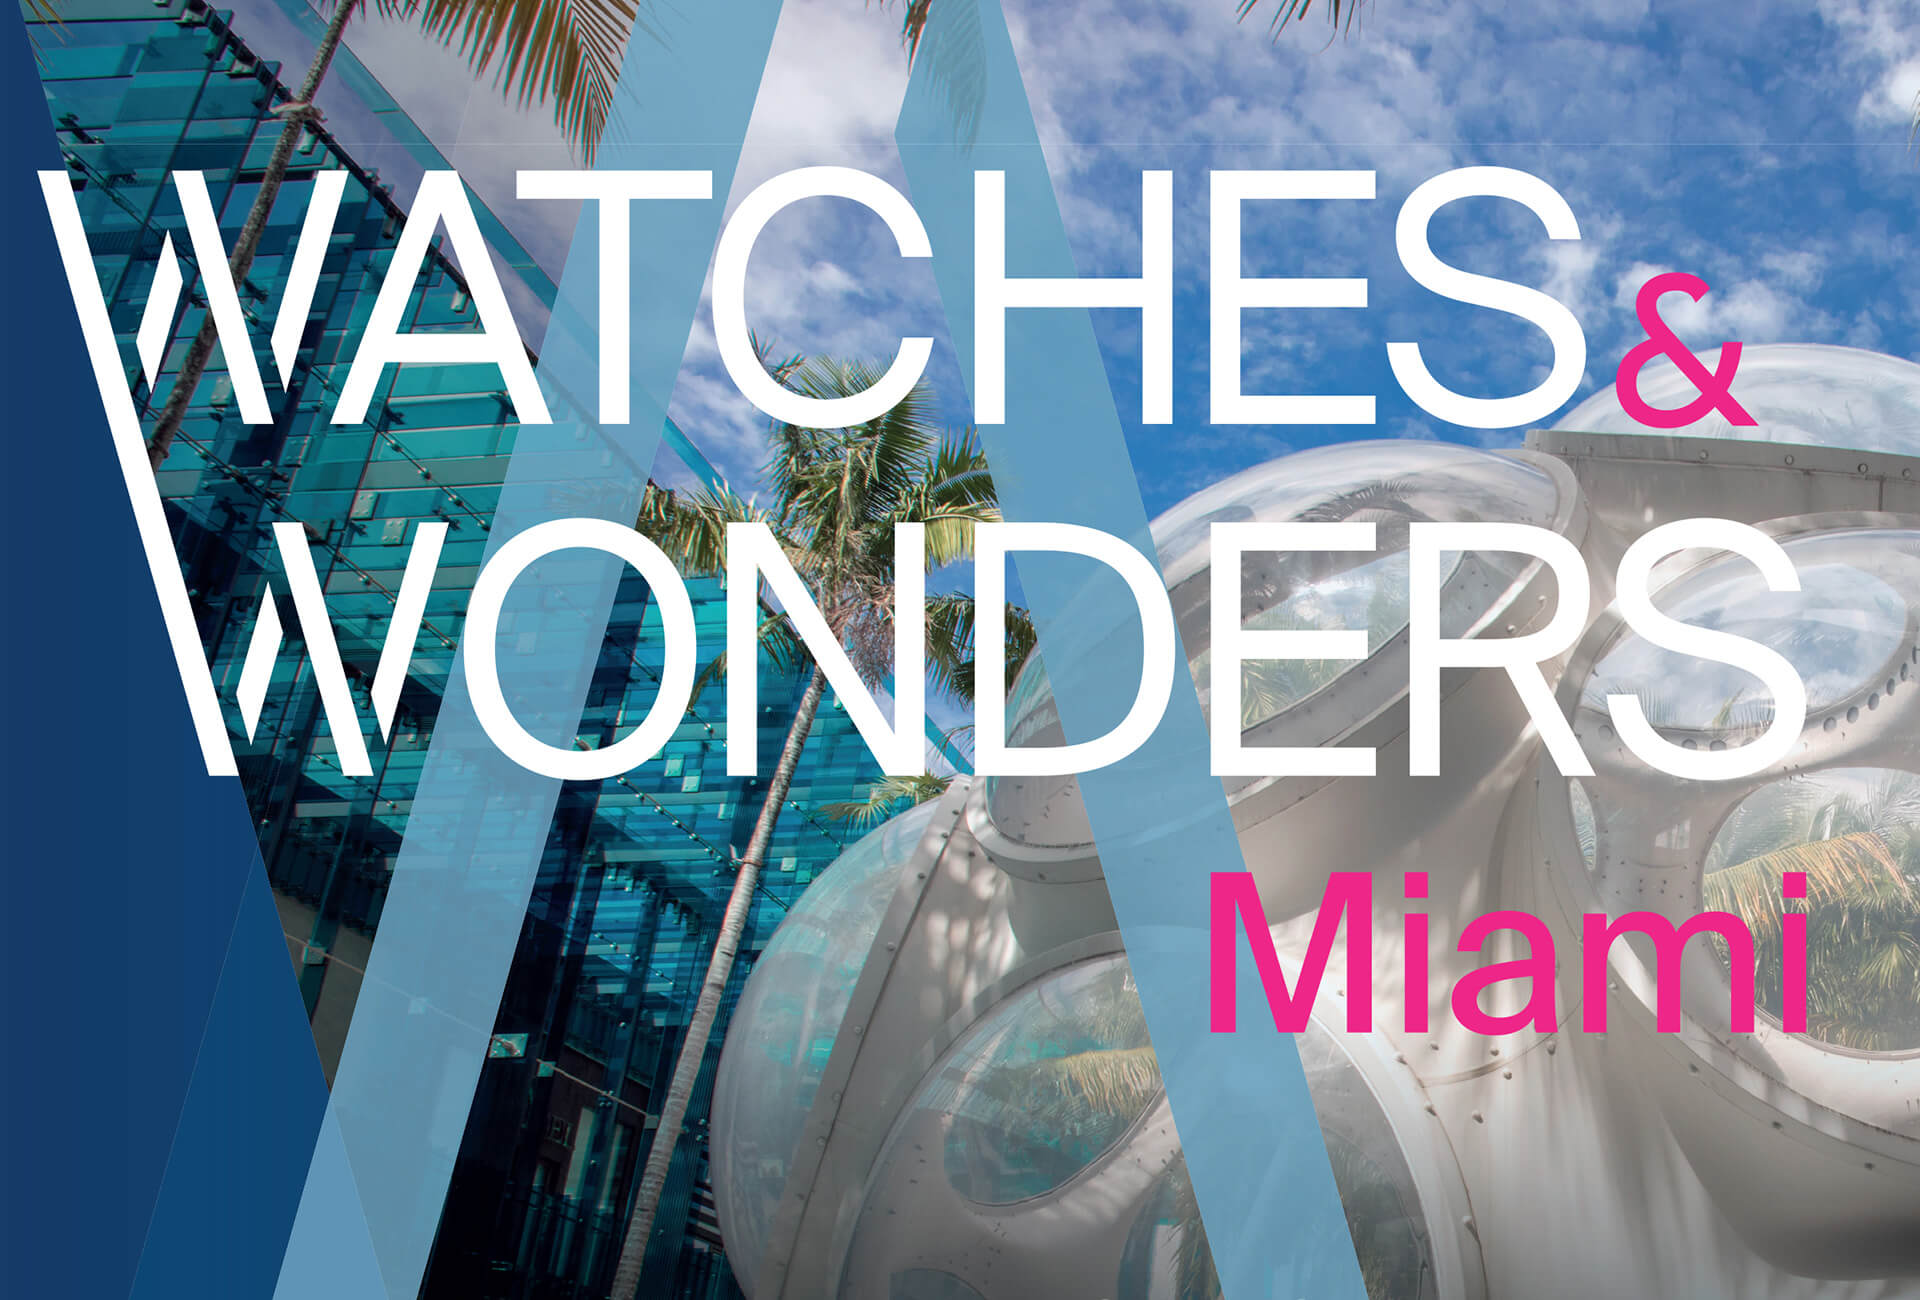 Watches & Wonders Miami debuts in the Miami Design District this